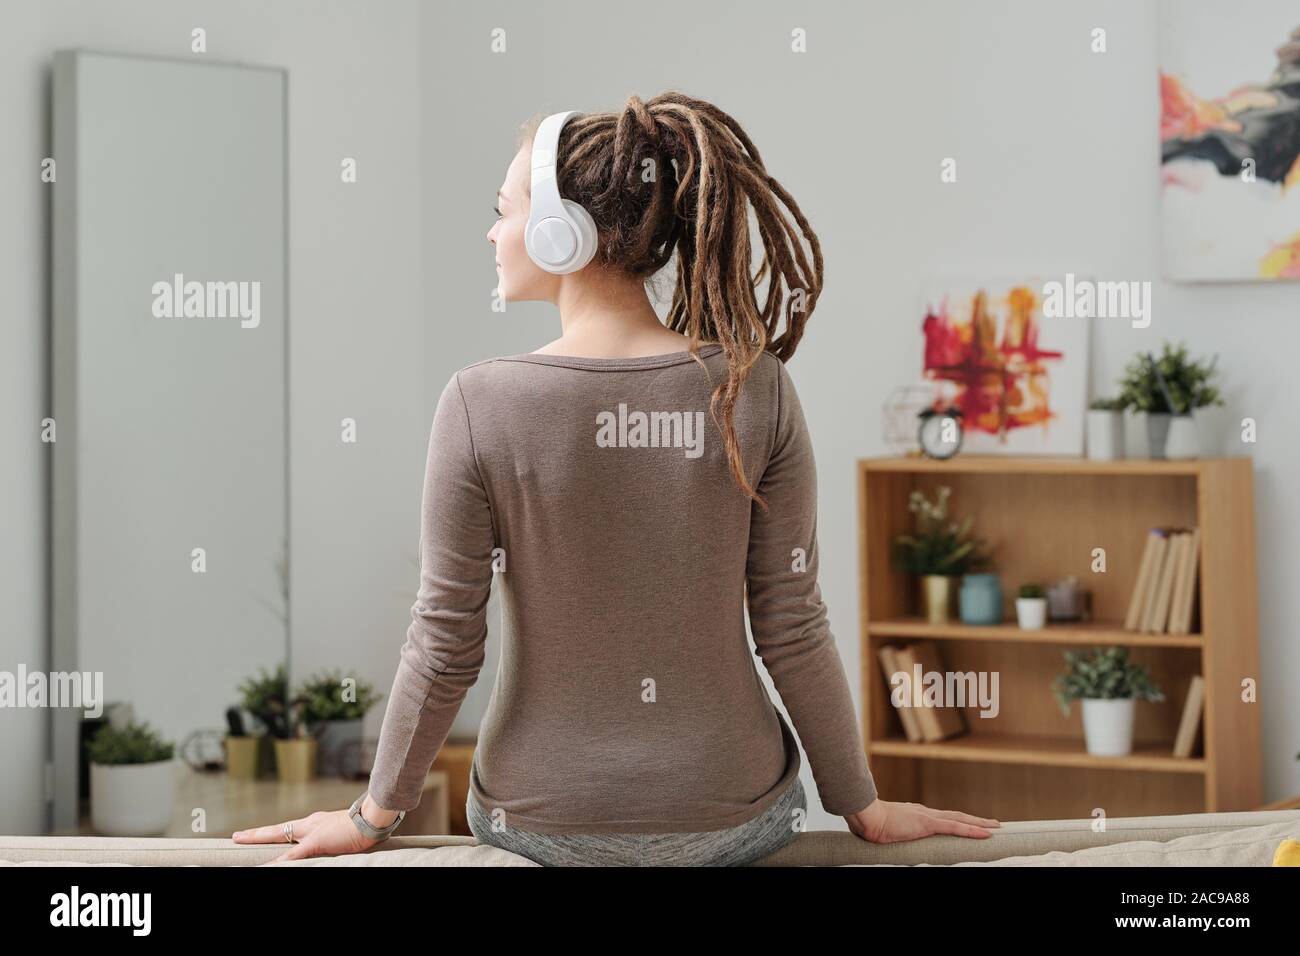 Back view of young restful female in activewear and headphones sitting on sofa Stock Photo